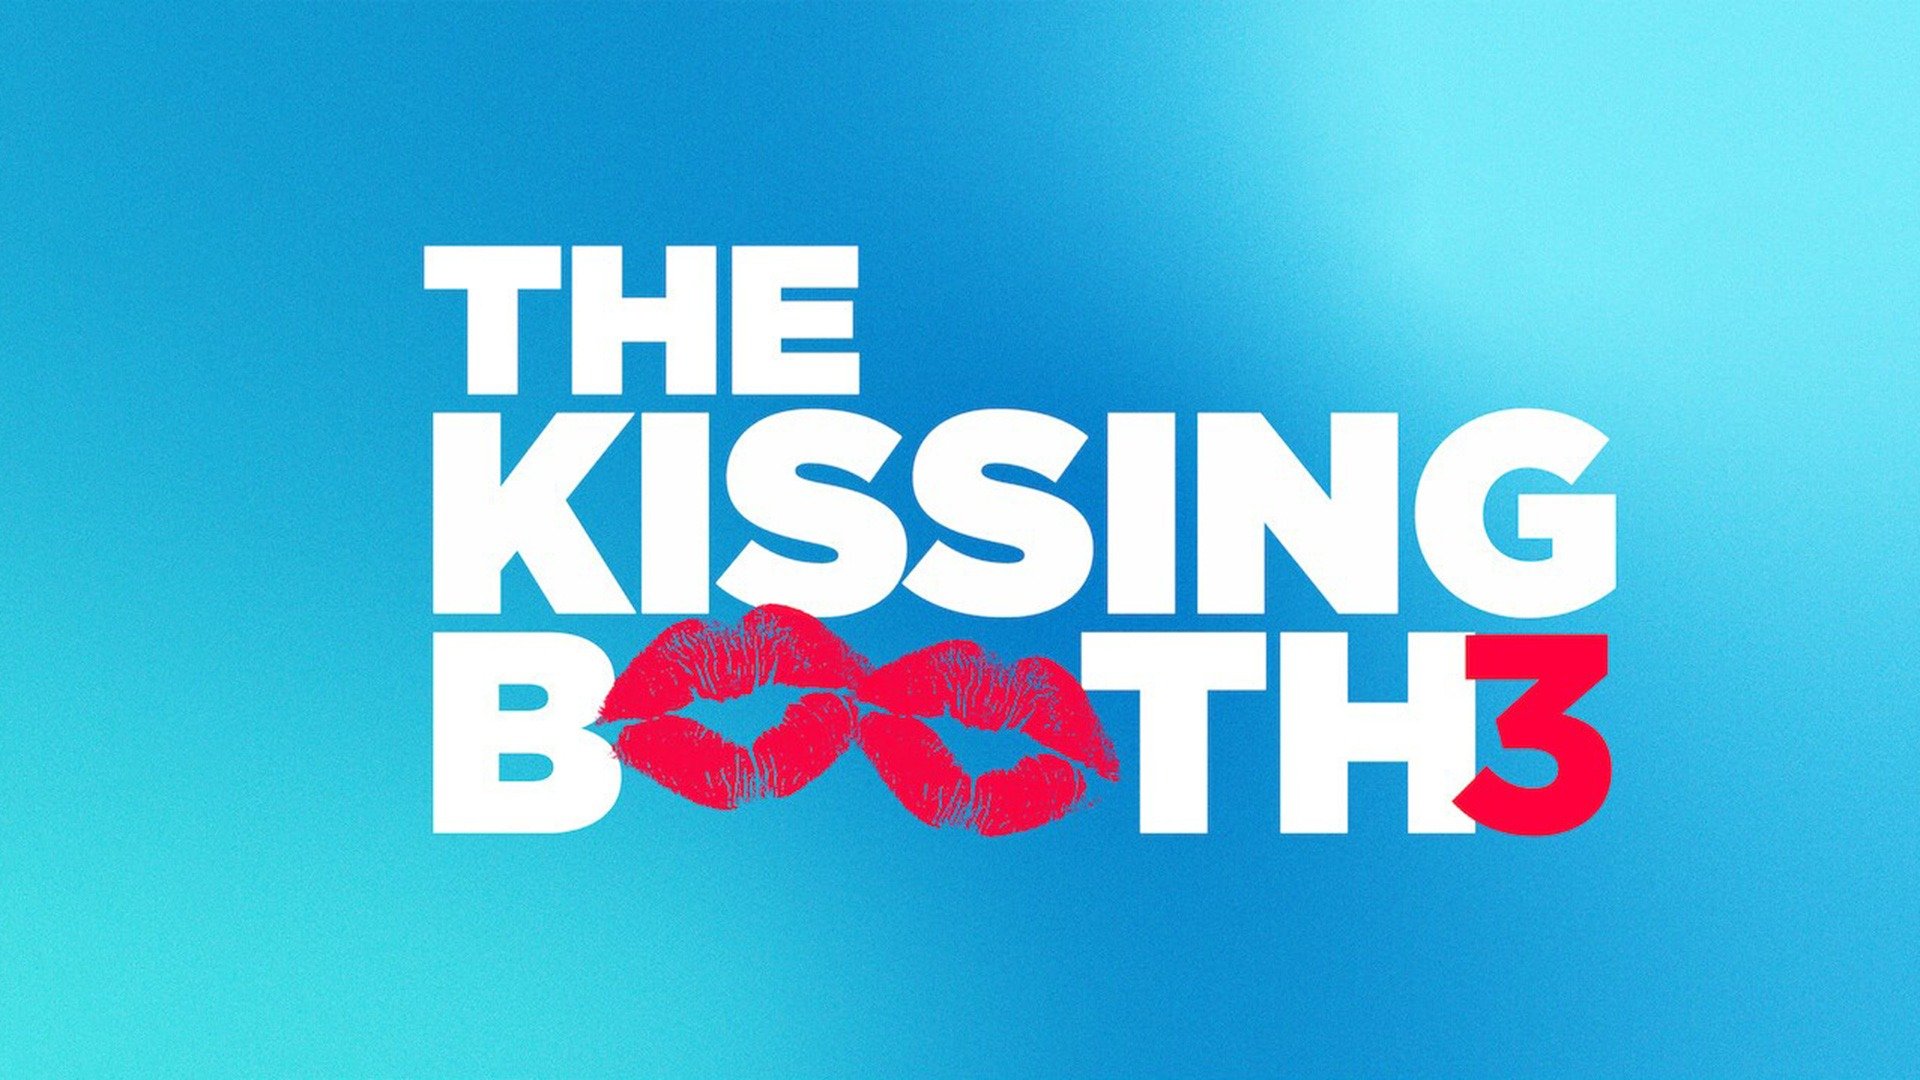 Threesome 2021. The kissing Booth 3.